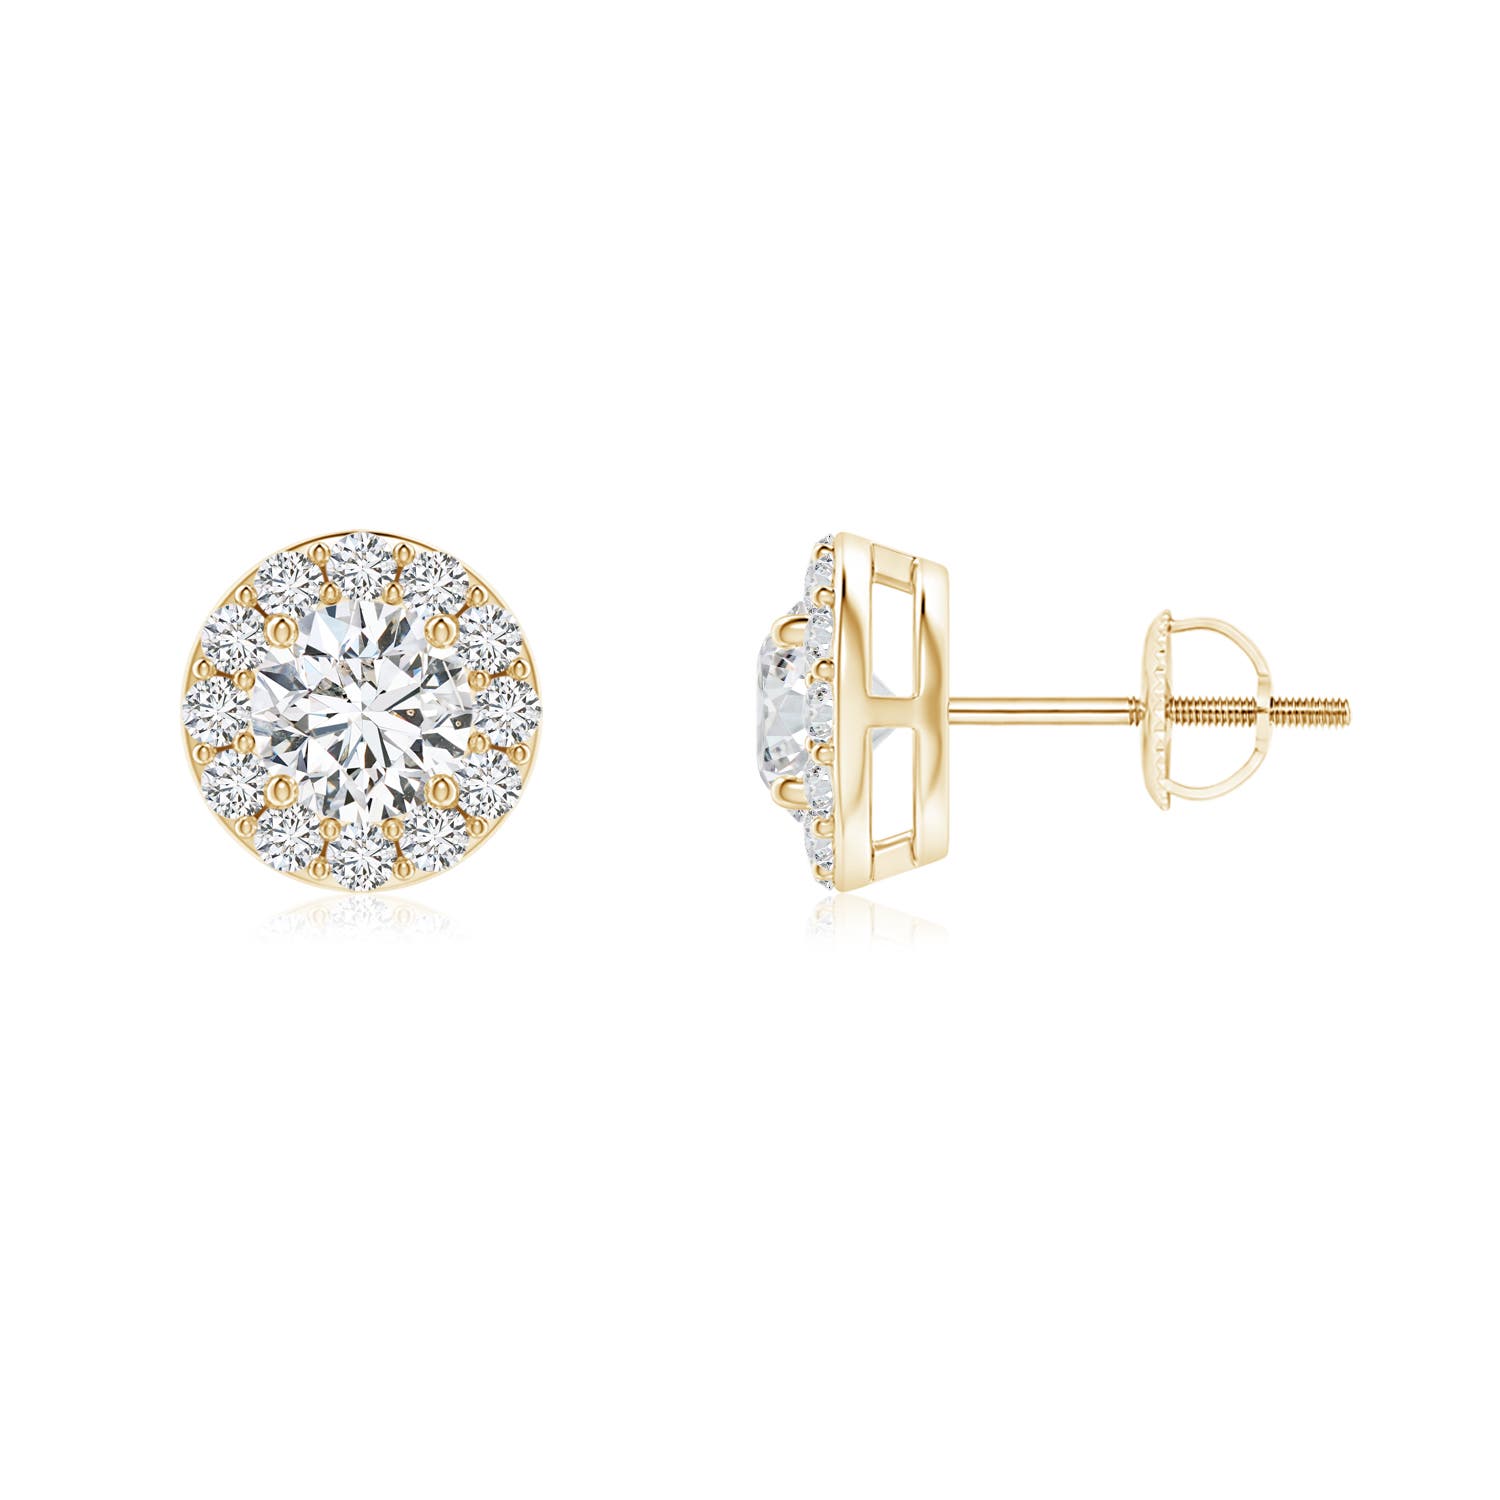 H, SI2 / 0.49 CT / 14 KT Yellow Gold